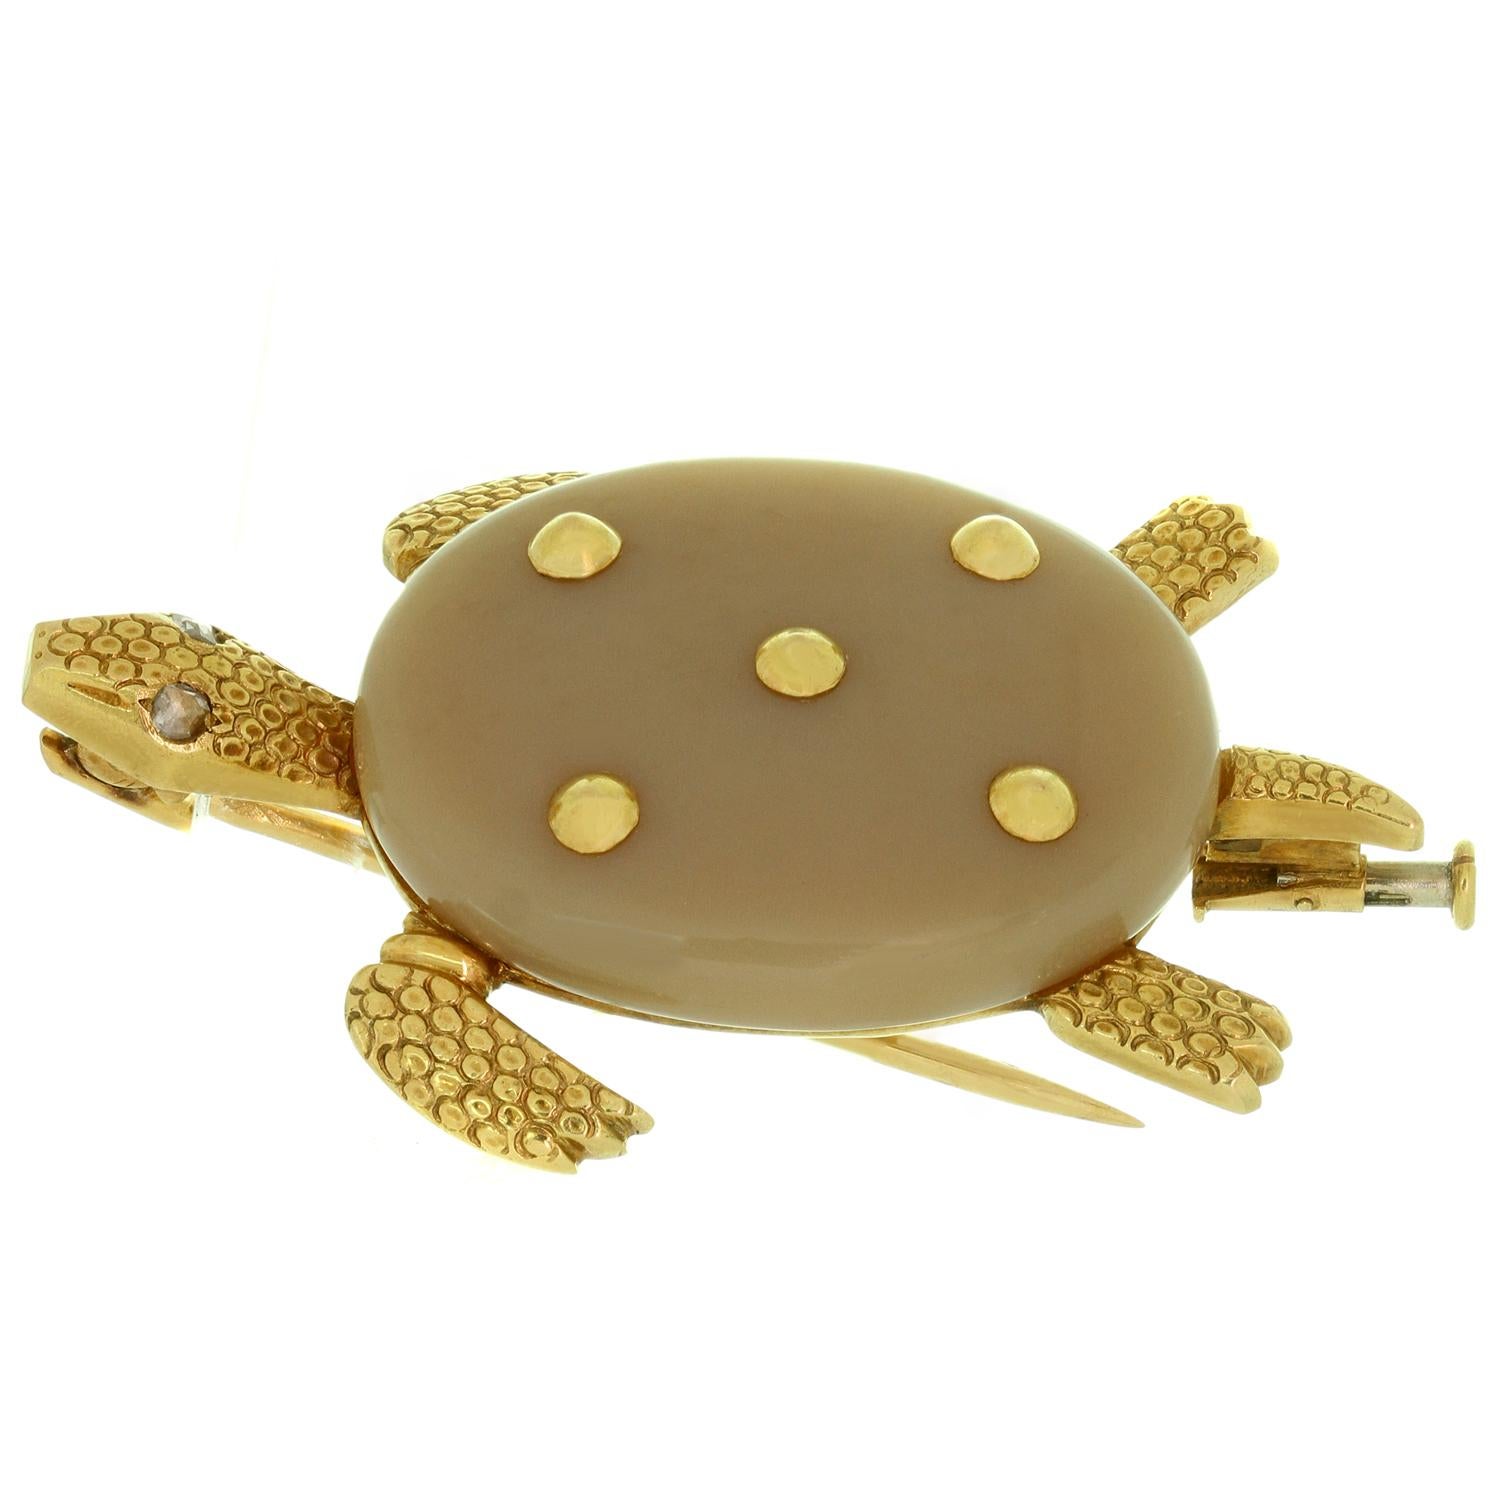 This fabulous vintage Cartier turtle-shaped brooch is crafted in 18k yellow gold and features shell made of agate, enhanced with five gold studs, a textured gold head, legs and tail, and accented with rose-cut 5cm diamond eyes. Completed with French